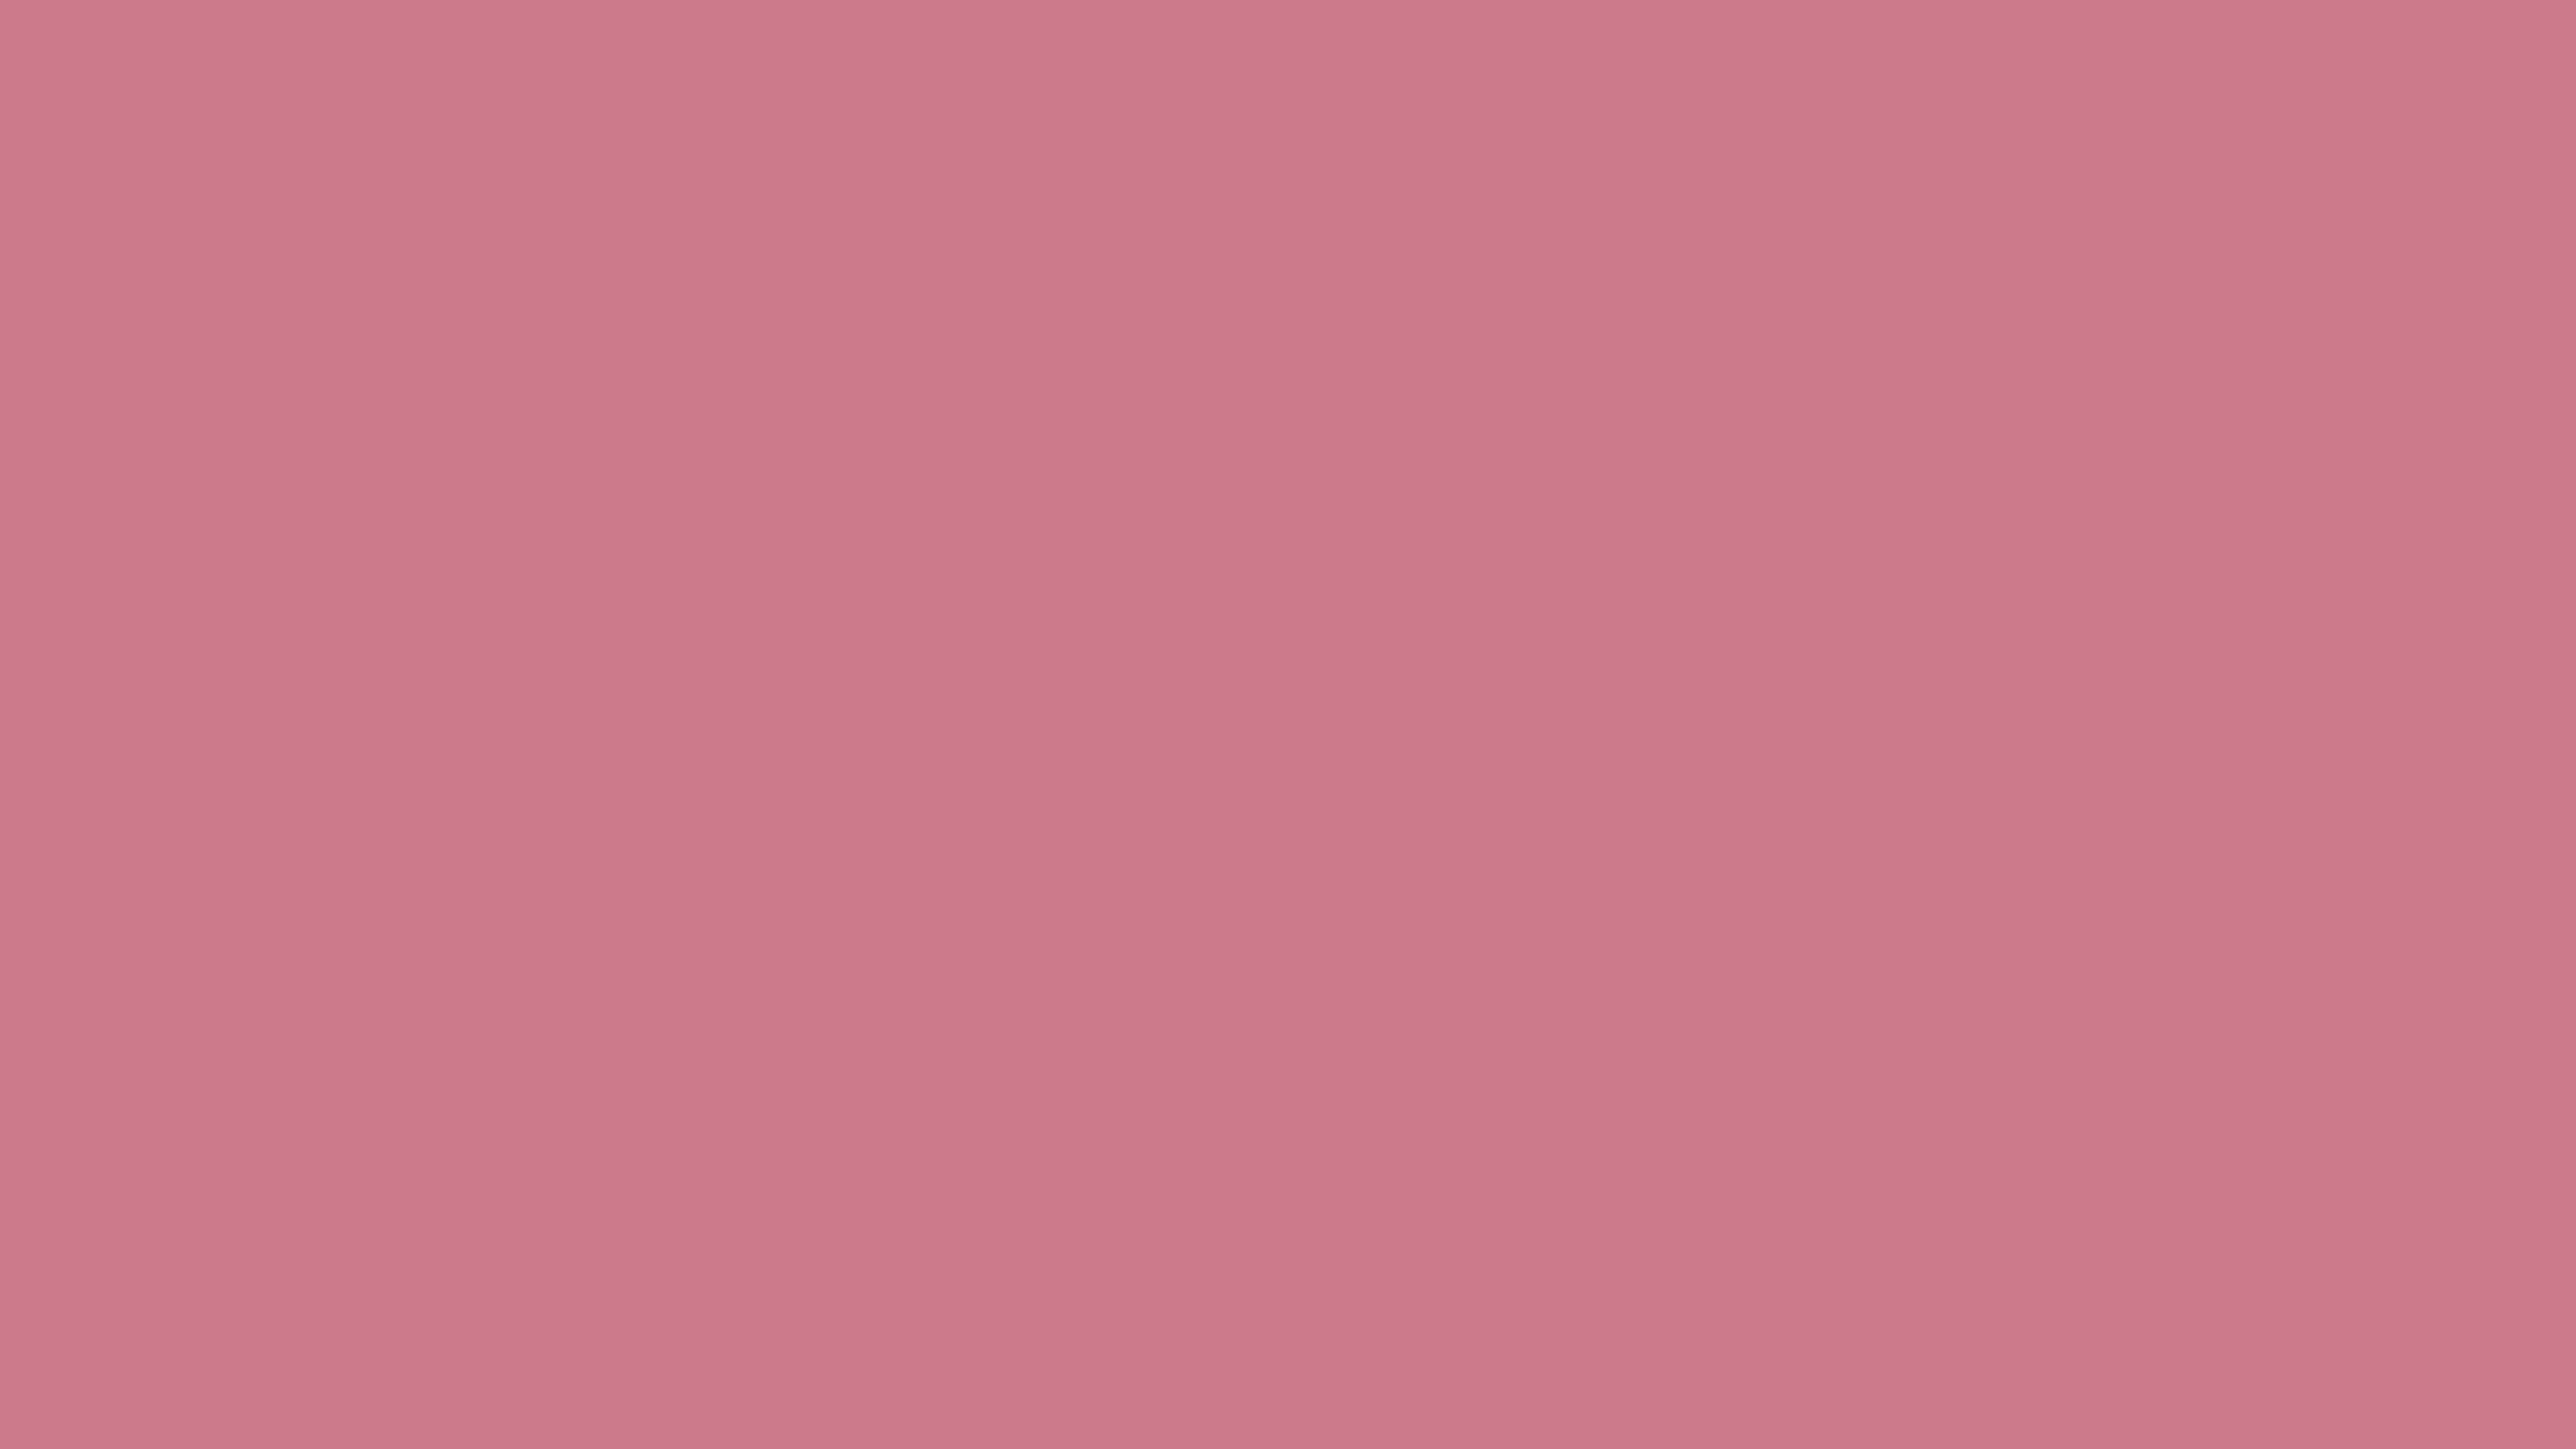 What is the color code for Dusty Pink?